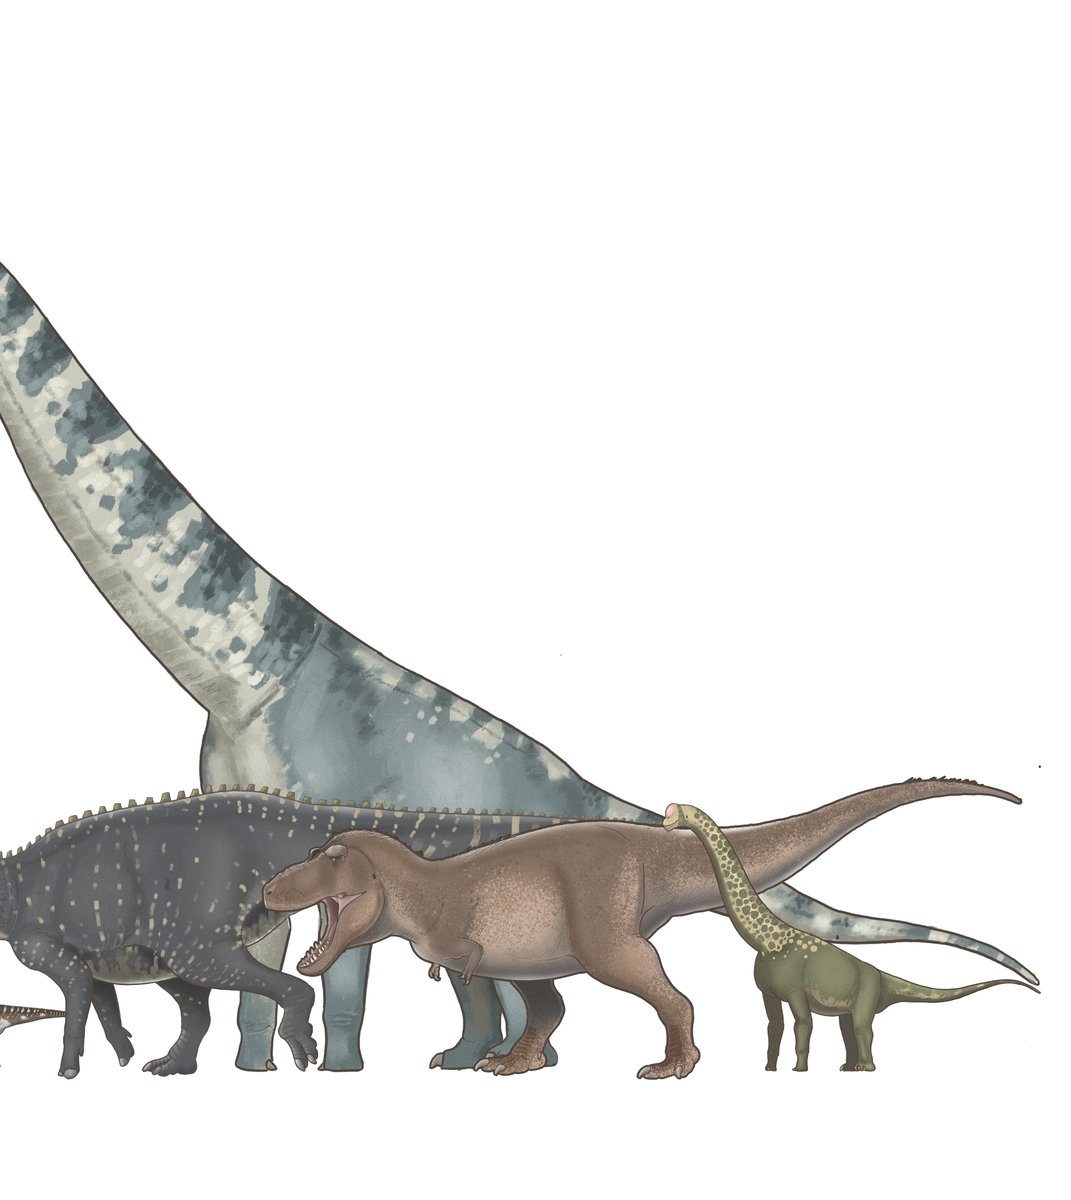 Dinosaur reconstruction that I have completed so far